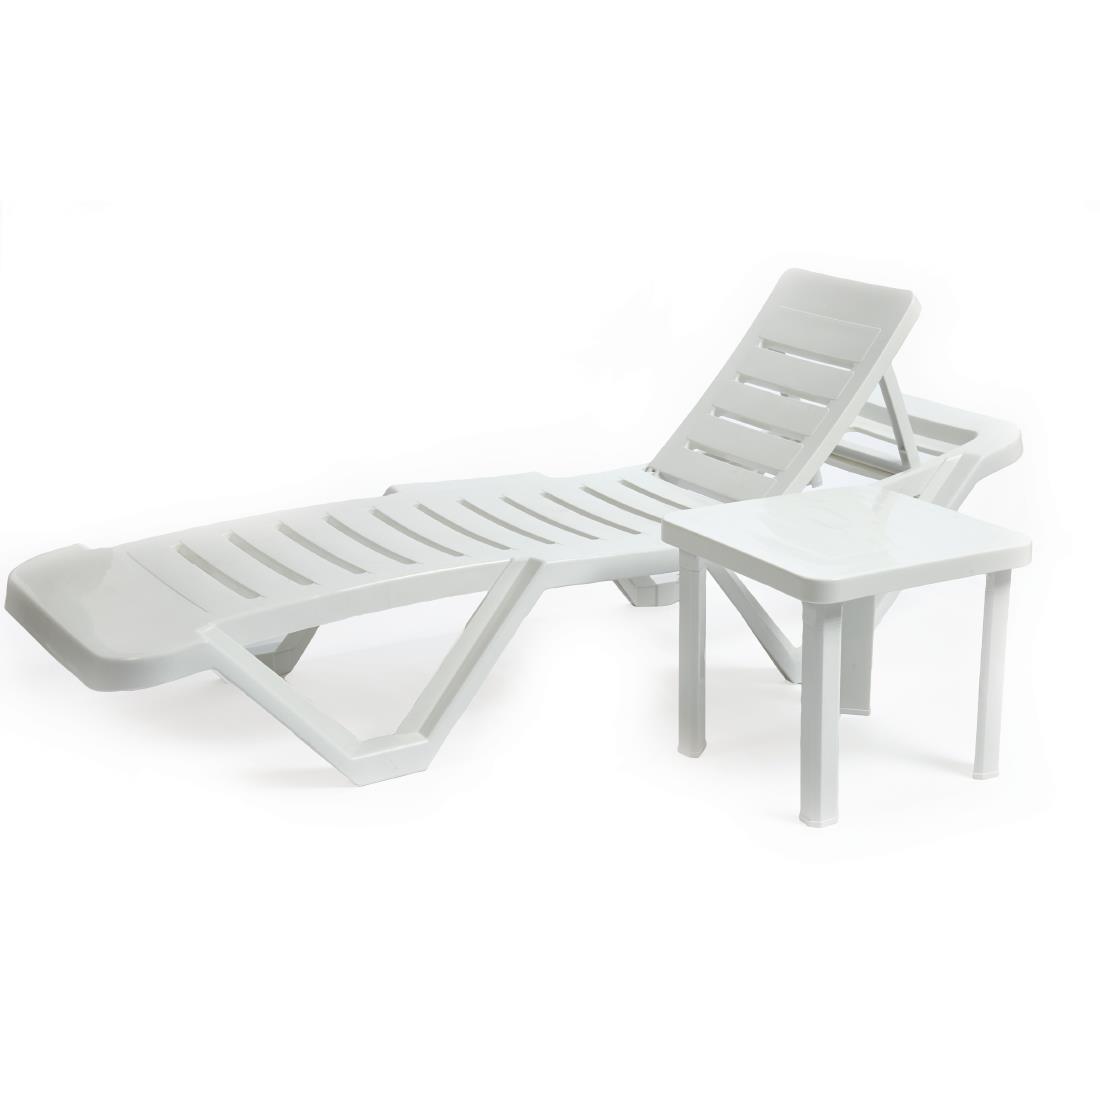 Resol Sun Lounger Side Tables 470mm (Pack of 6) - CF116  - 4